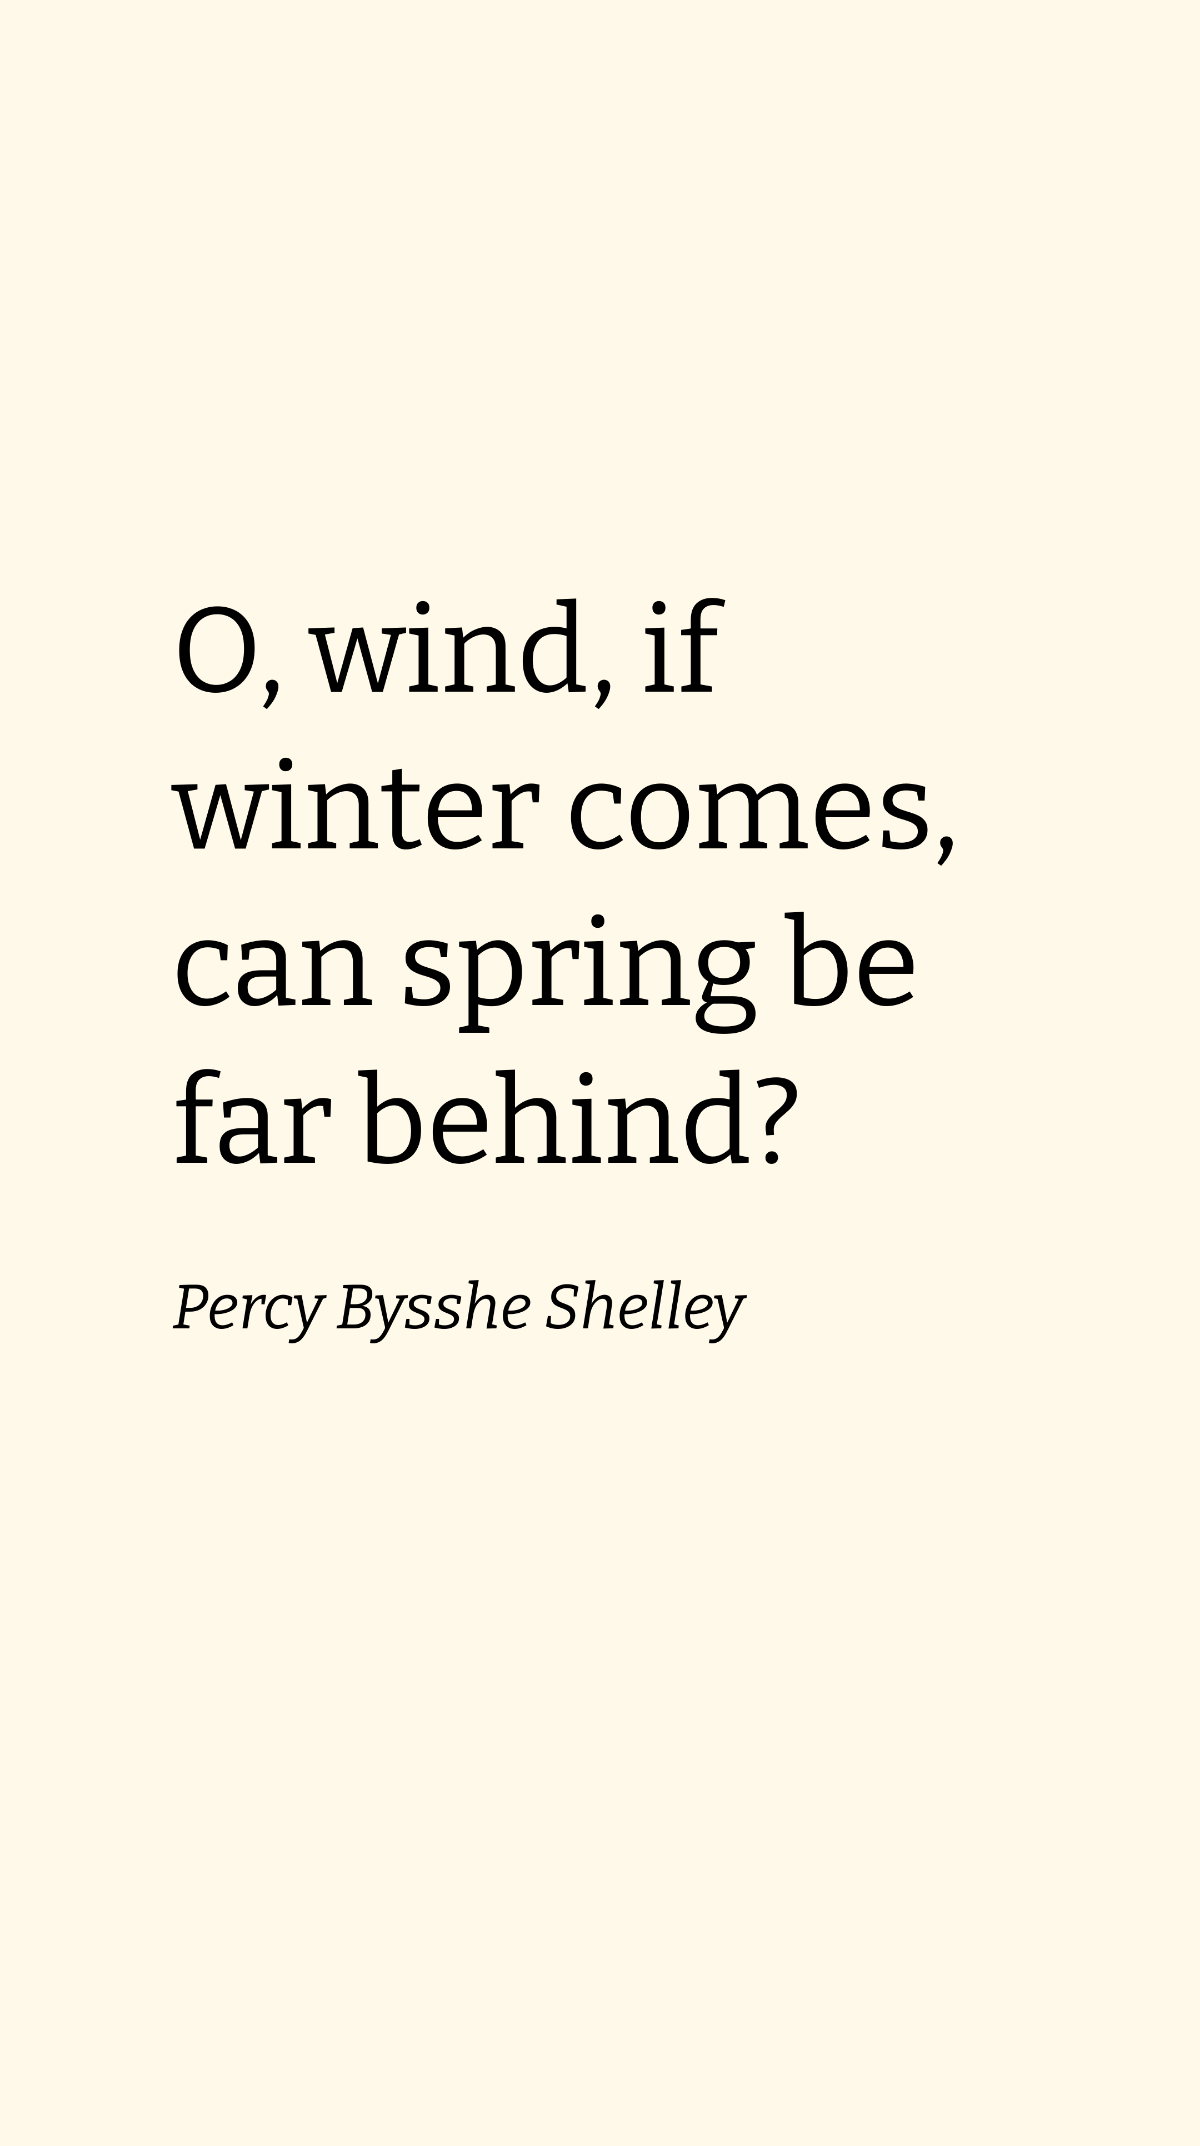 Free Percy Bysshe Shelley - O, wind, if winter comes, can spring be far behind? Template